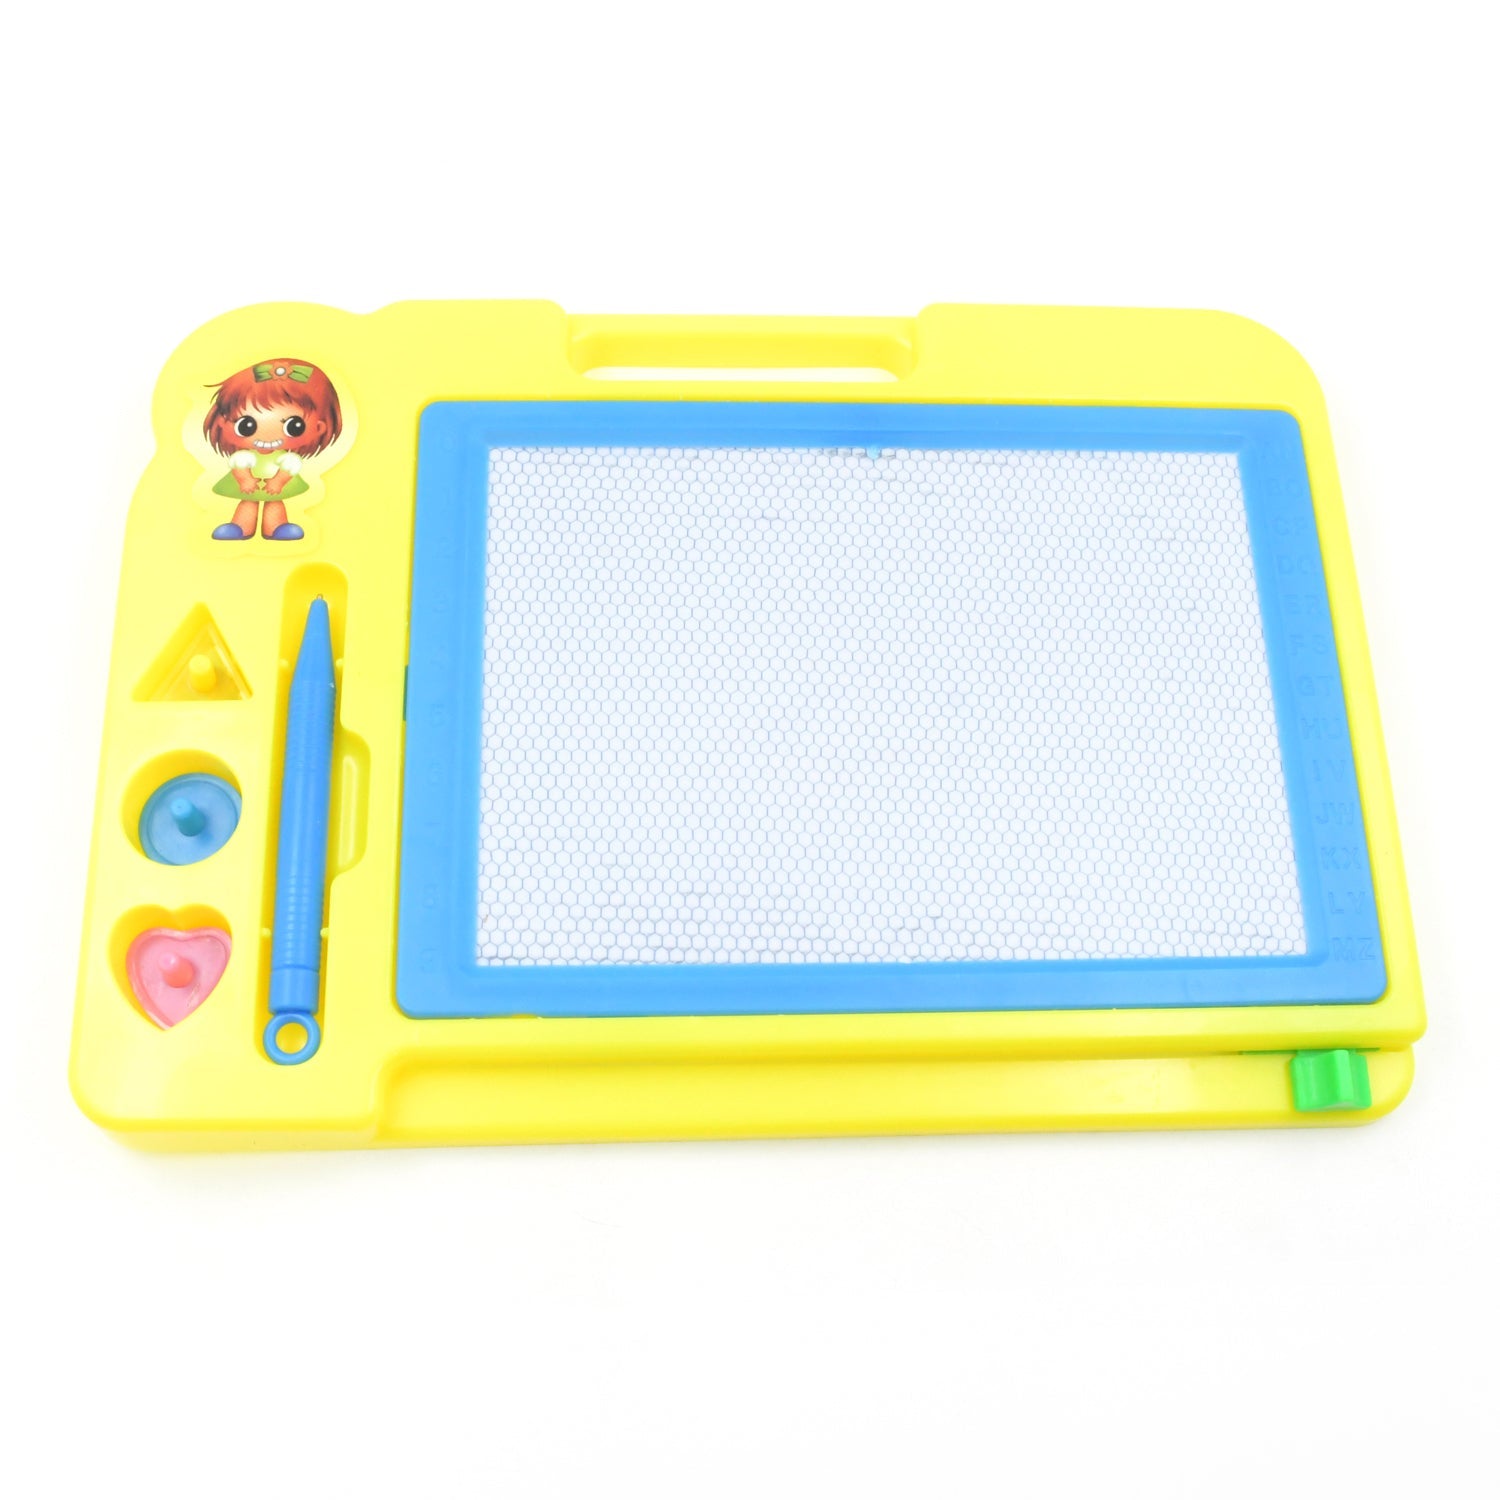 1902 Children Magic Slate Pen Doodle Pad Erasable Drawing Easy Reading Writing Learning Graffiti Board Kids Gift Toy Magnetic Painting Sketch Pad for Baby Children (1 Pc Mix Color)